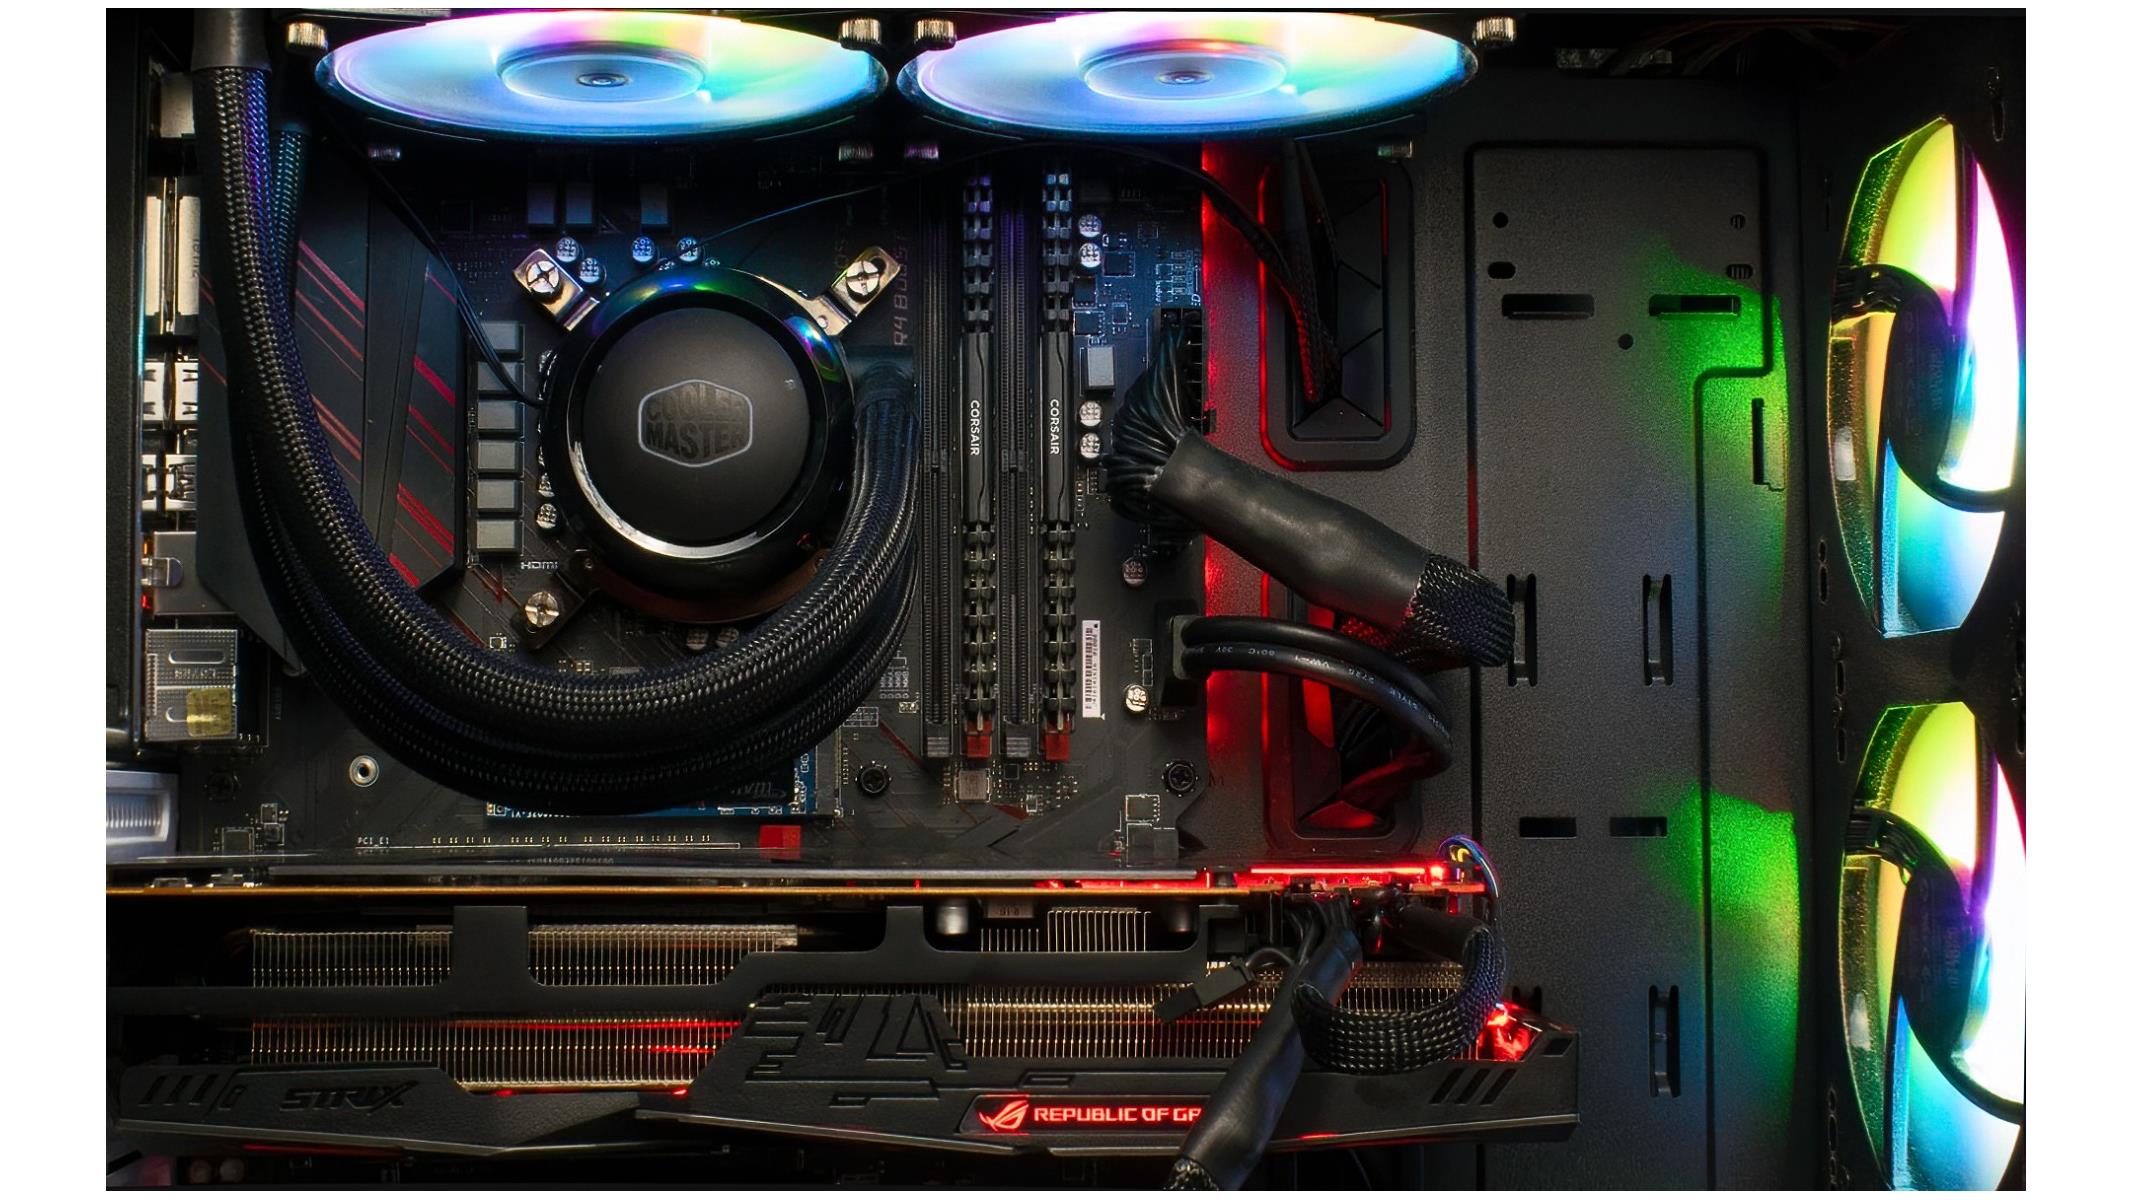 handicappet friktion At vise Gaming Level-Up: Benefits Of Upgrading Integrated Graphics With EVGA & ASUS  | HotHardware